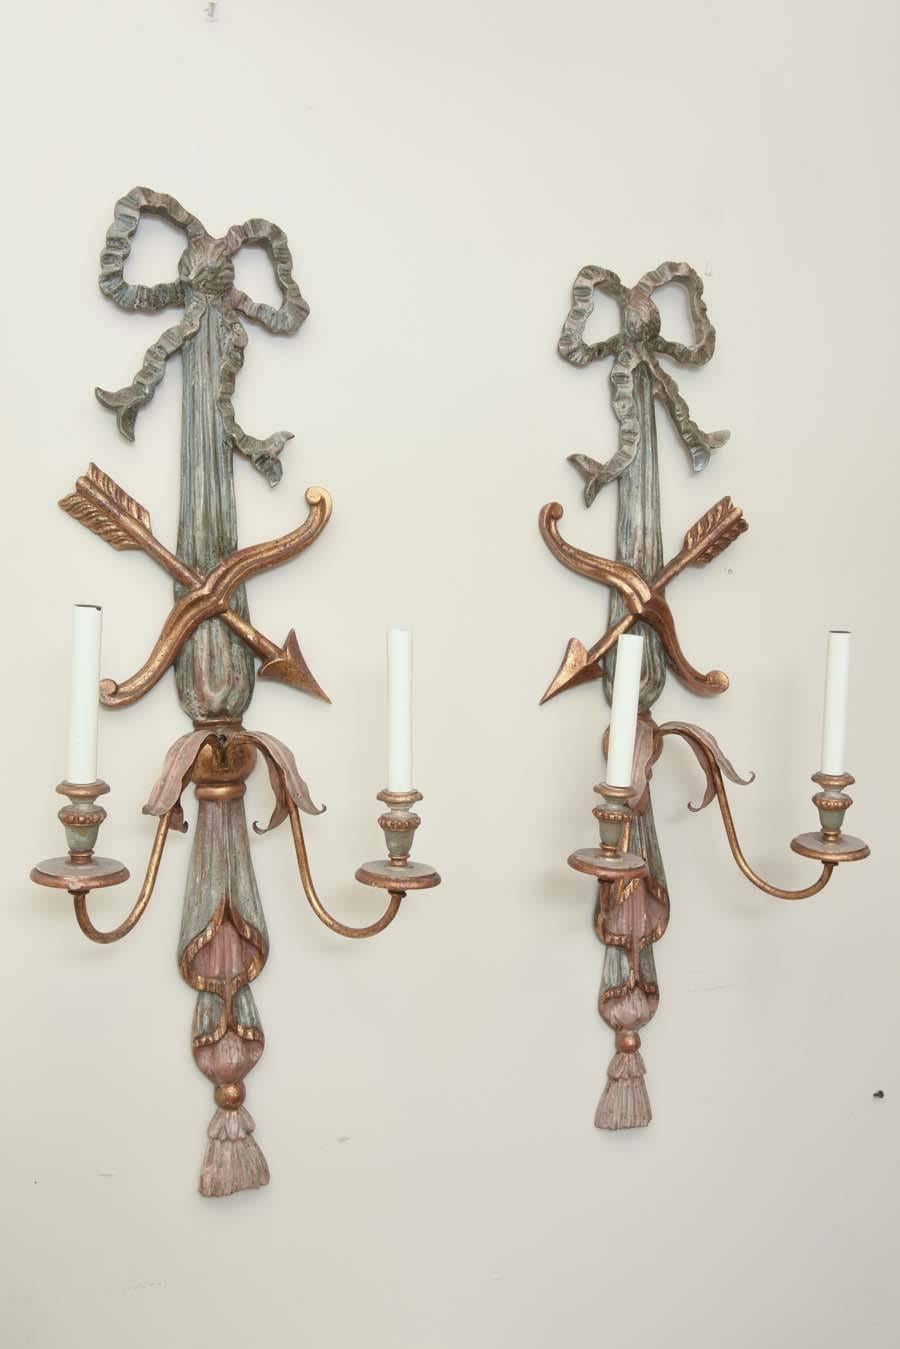 Opposing pair of carved wood sconces, painted and parcel gilt, each shaped as draped fabric surmounted by a bow, having crossed arrows, two scrolling iron candlearms with wood candlepots. Electrified.

Stock ID: D4962